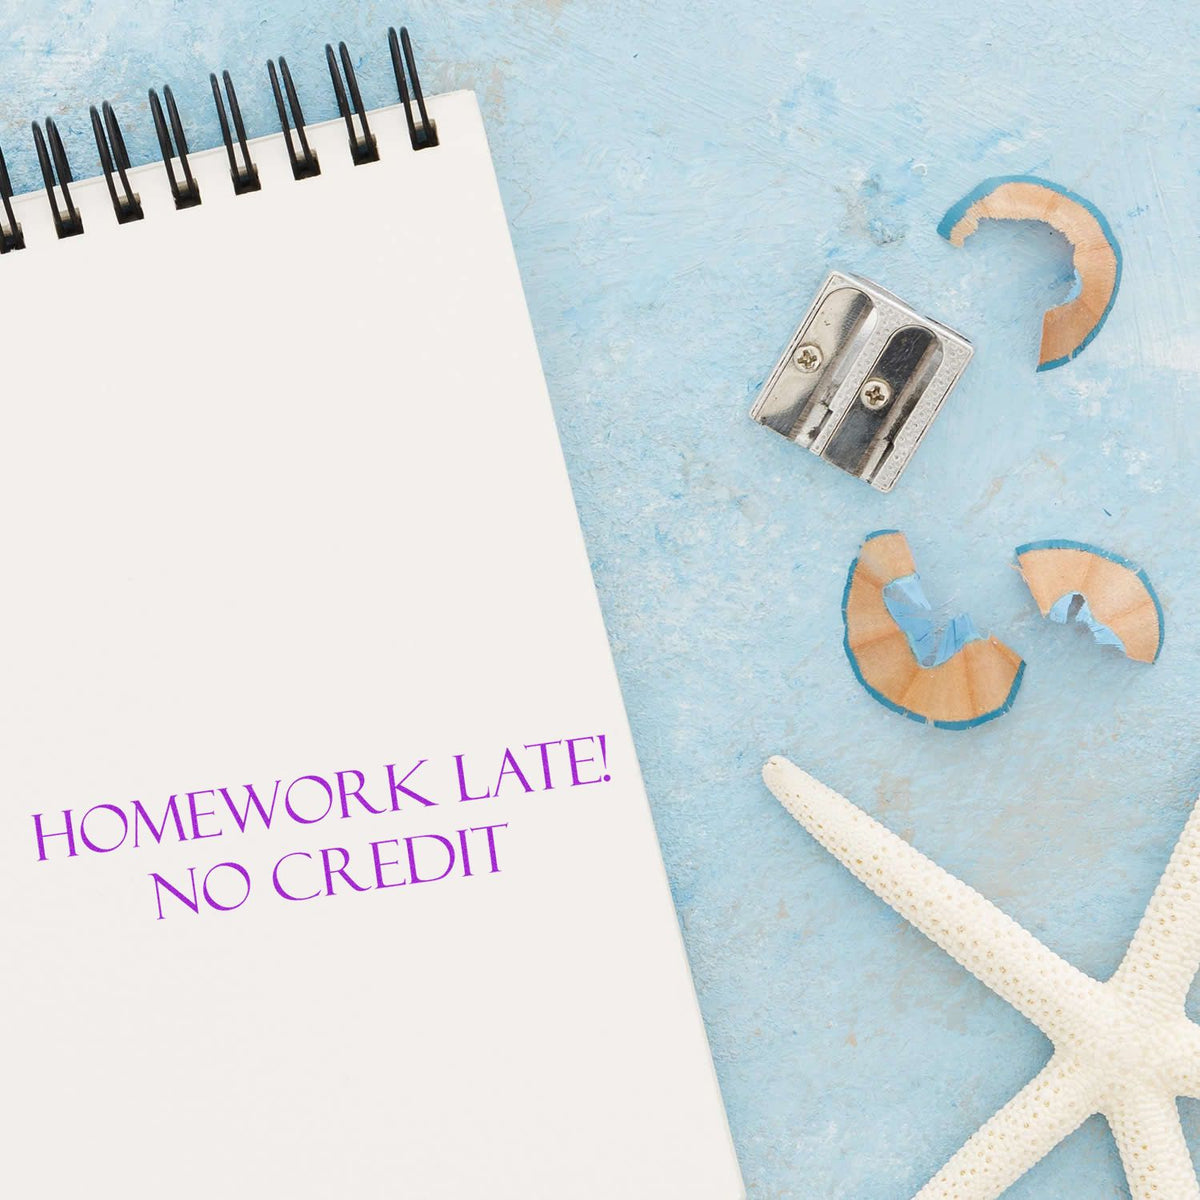 Homework Late No Credit Rubber Stamp In Use